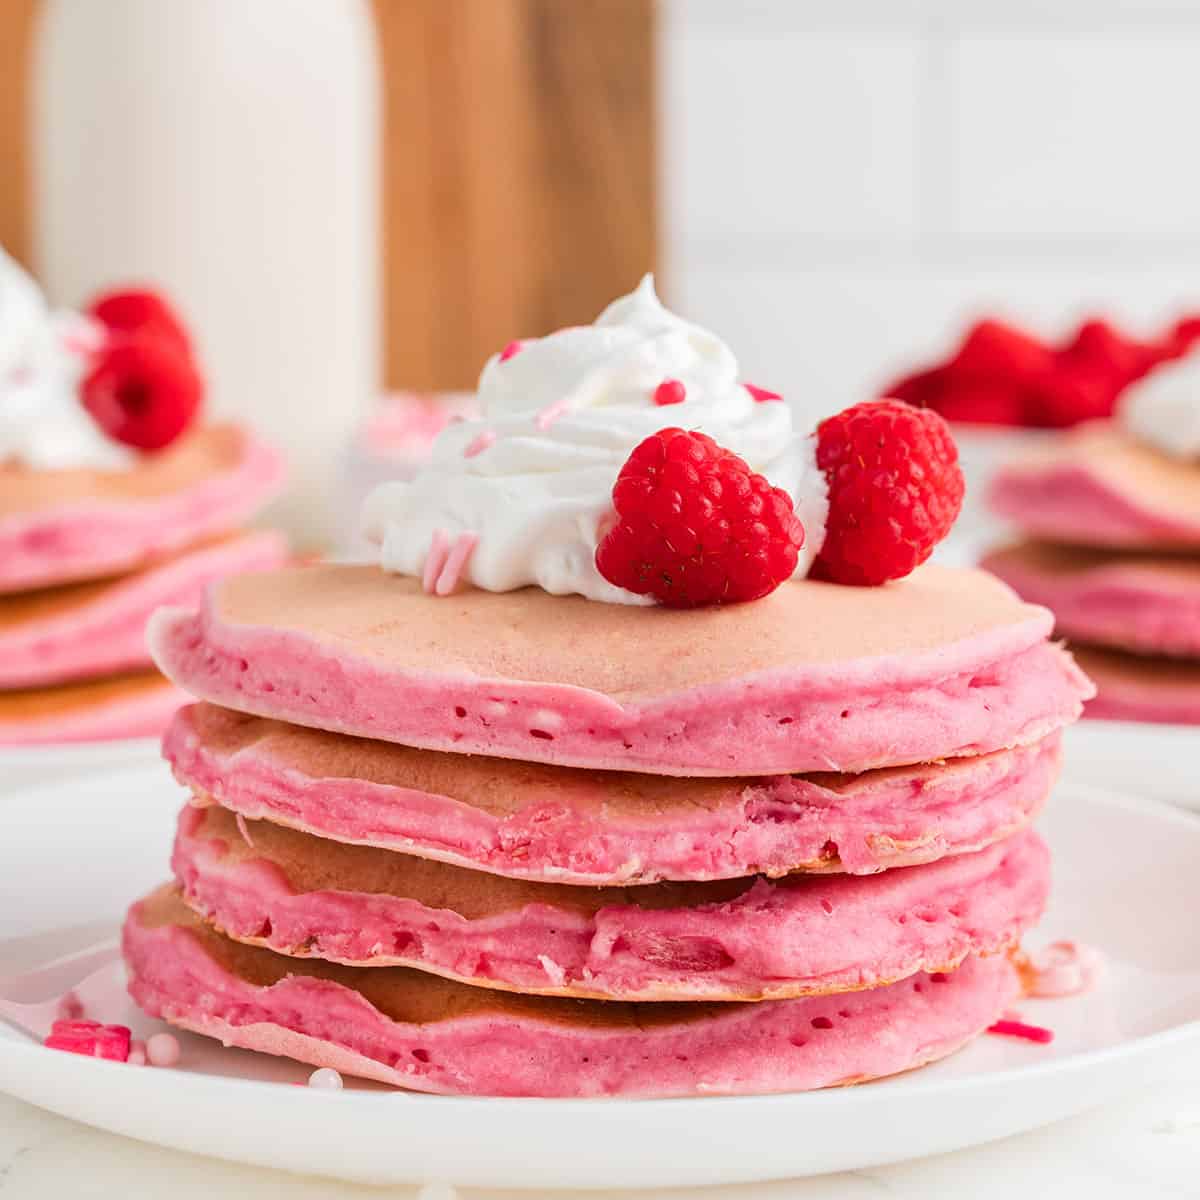 stack of pink pancakes with raspberries and whipped cream on top